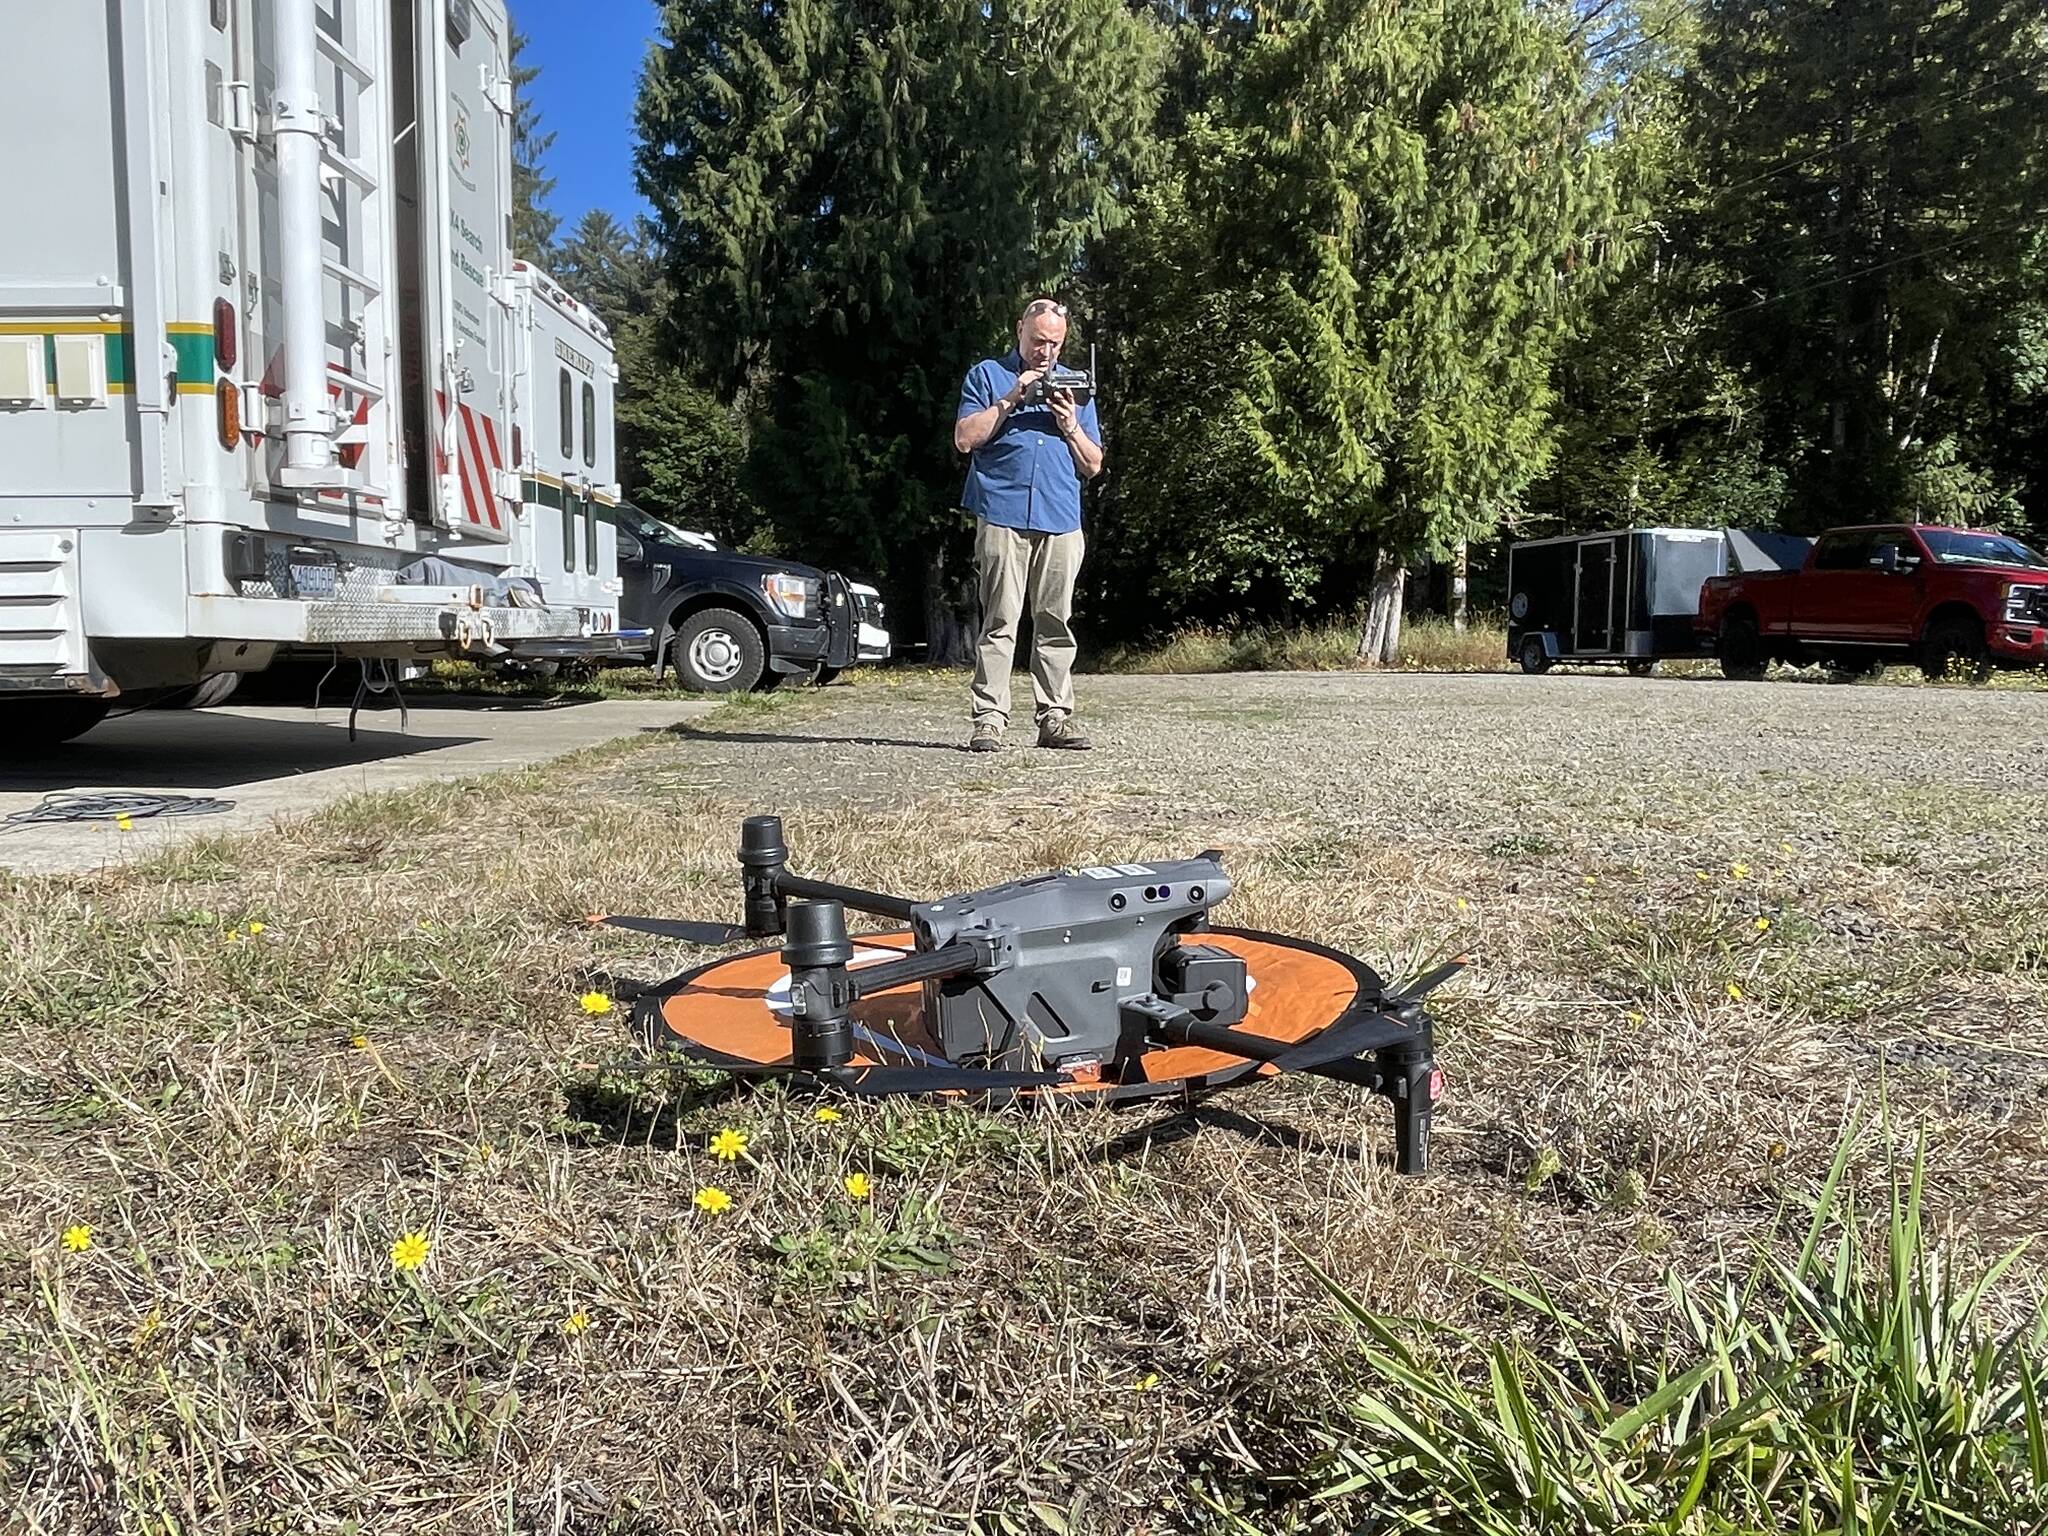 A member of King County’s 4x4 Search and Rescue team prepares to launch a drone during an evidence search in the Oakley Carlson case. (Michael S. Lockett / The Daily World)